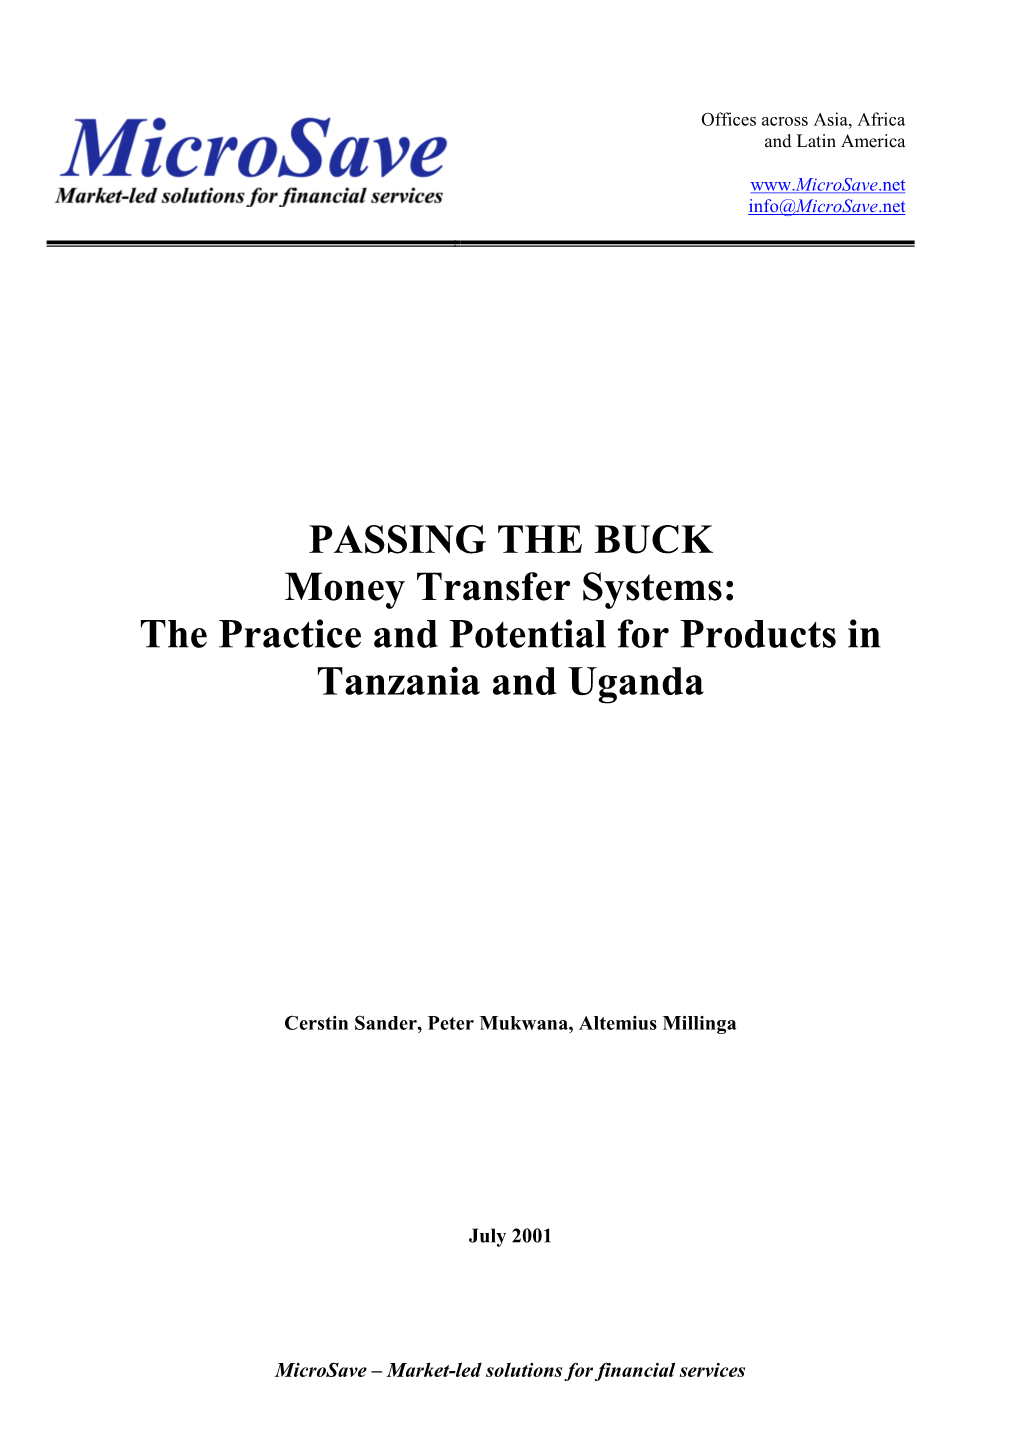 PASSING the BUCK Money Transfer Systems: the Practice and Potential for Products in Tanzania and Uganda